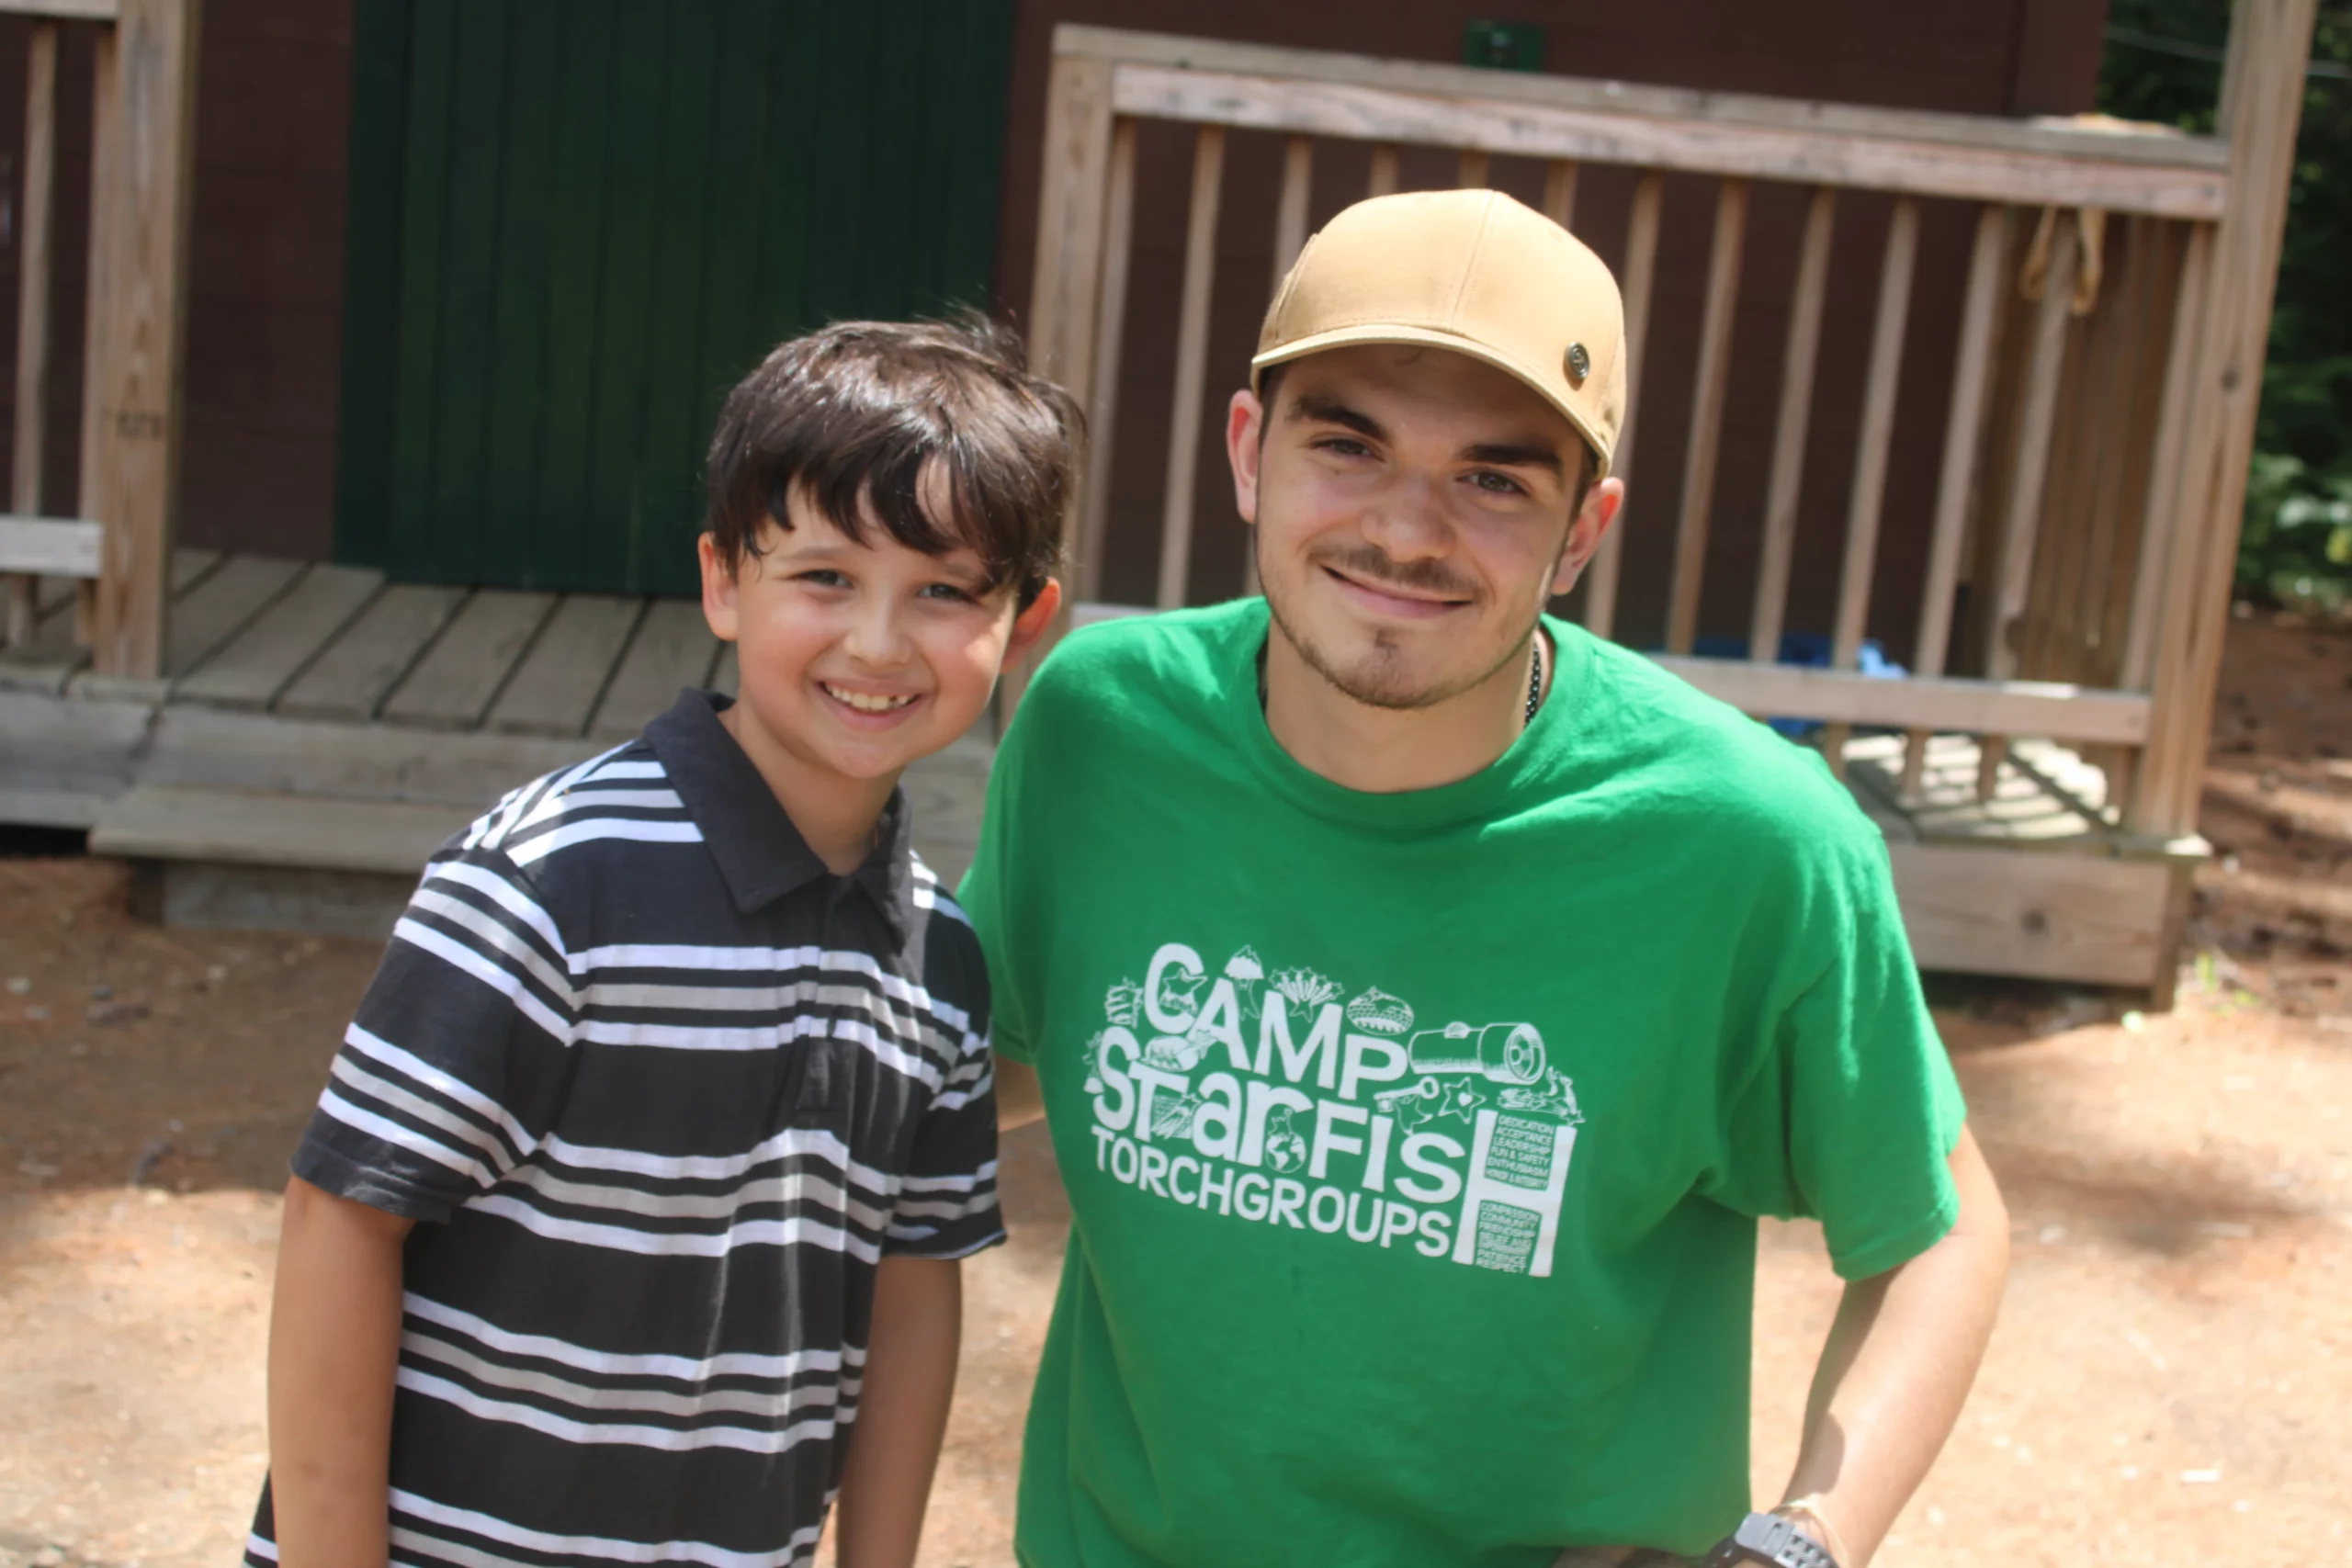 Smiling Camp Counselor and camper boy at Camp Starfish